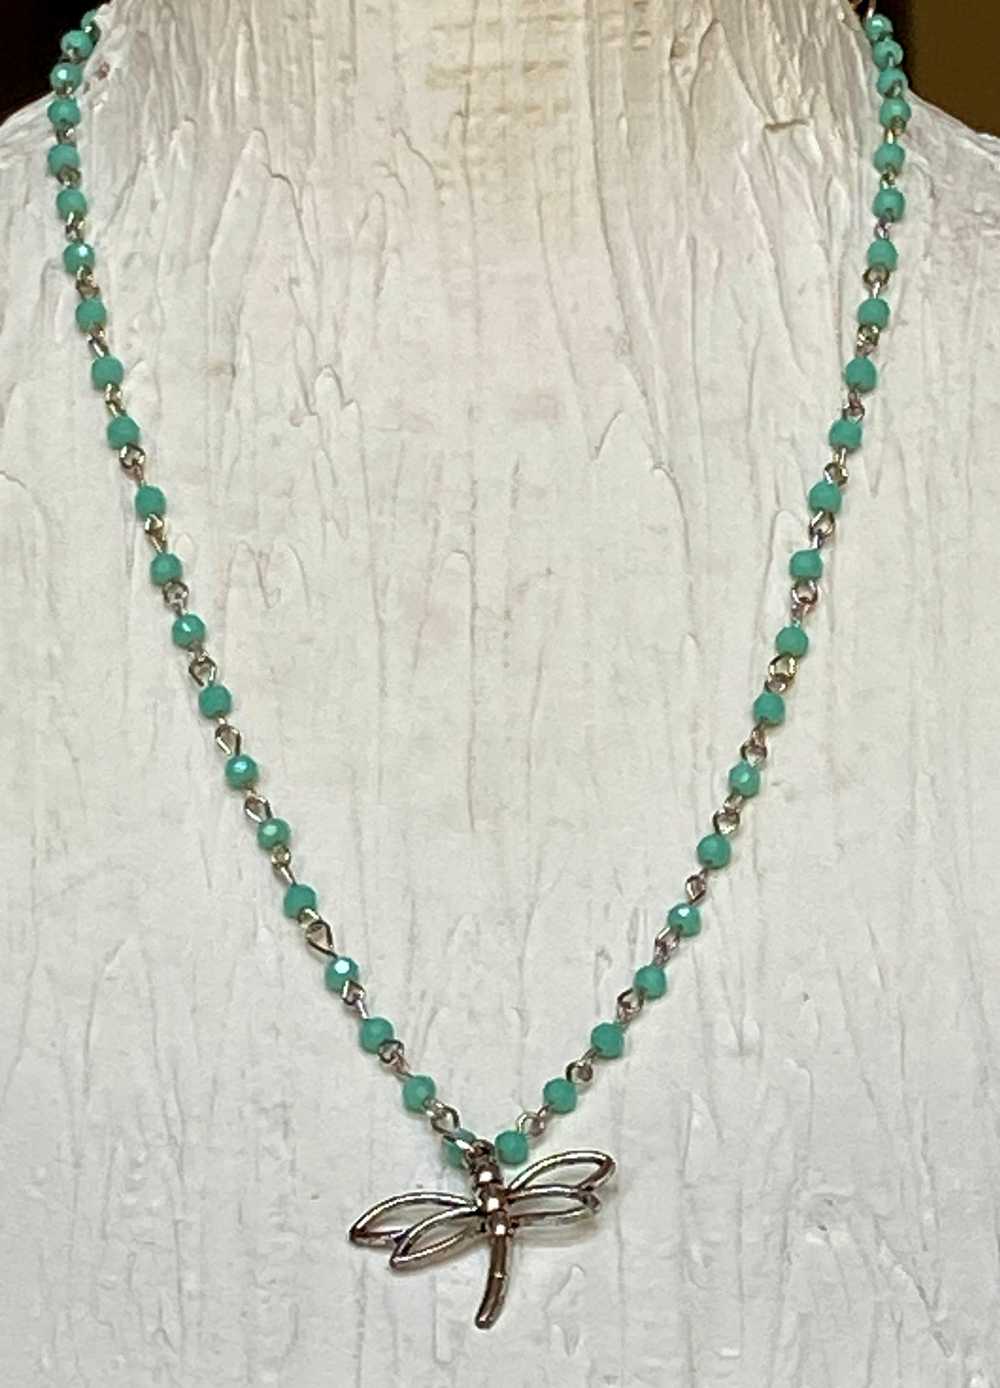 Dragonfly necklace - image 8